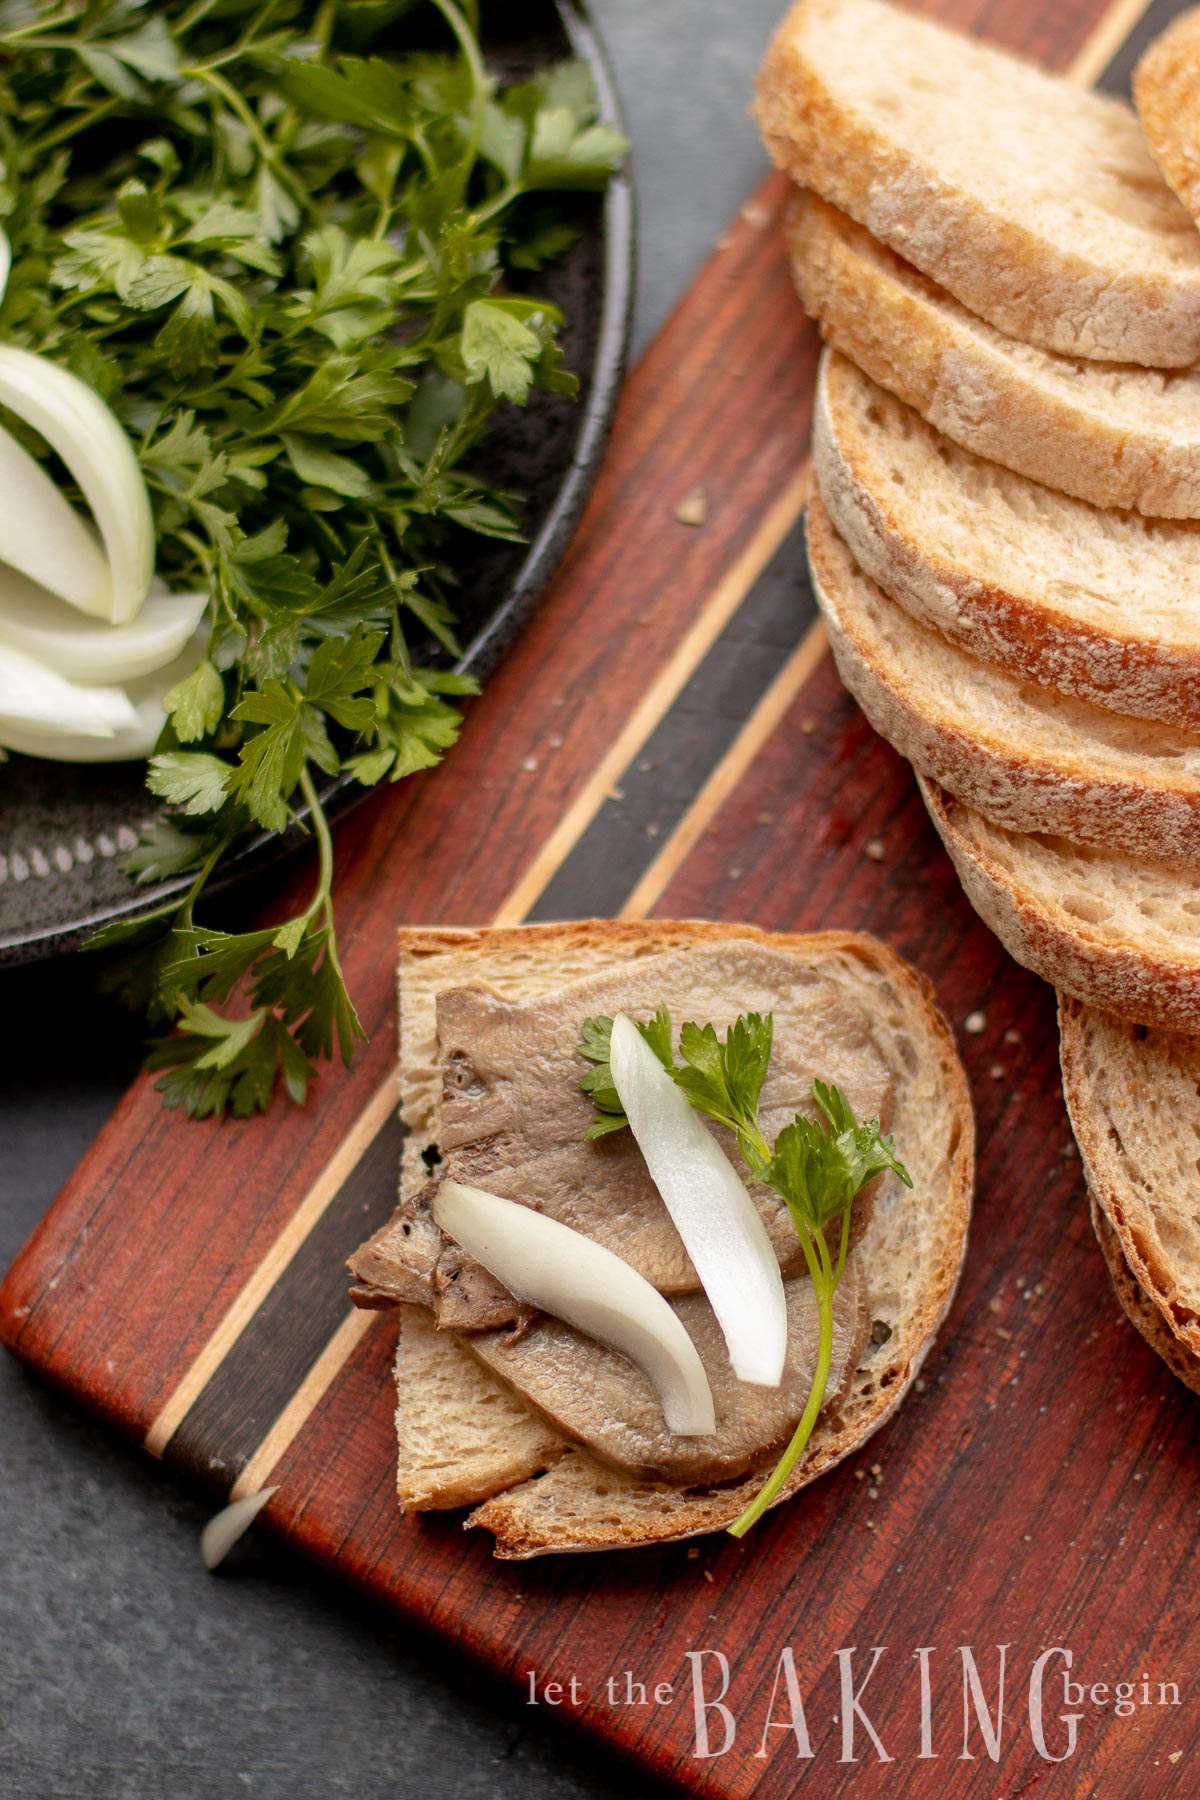 Beef tongue recipe with tongue cooked on top of sliced bread with onion.